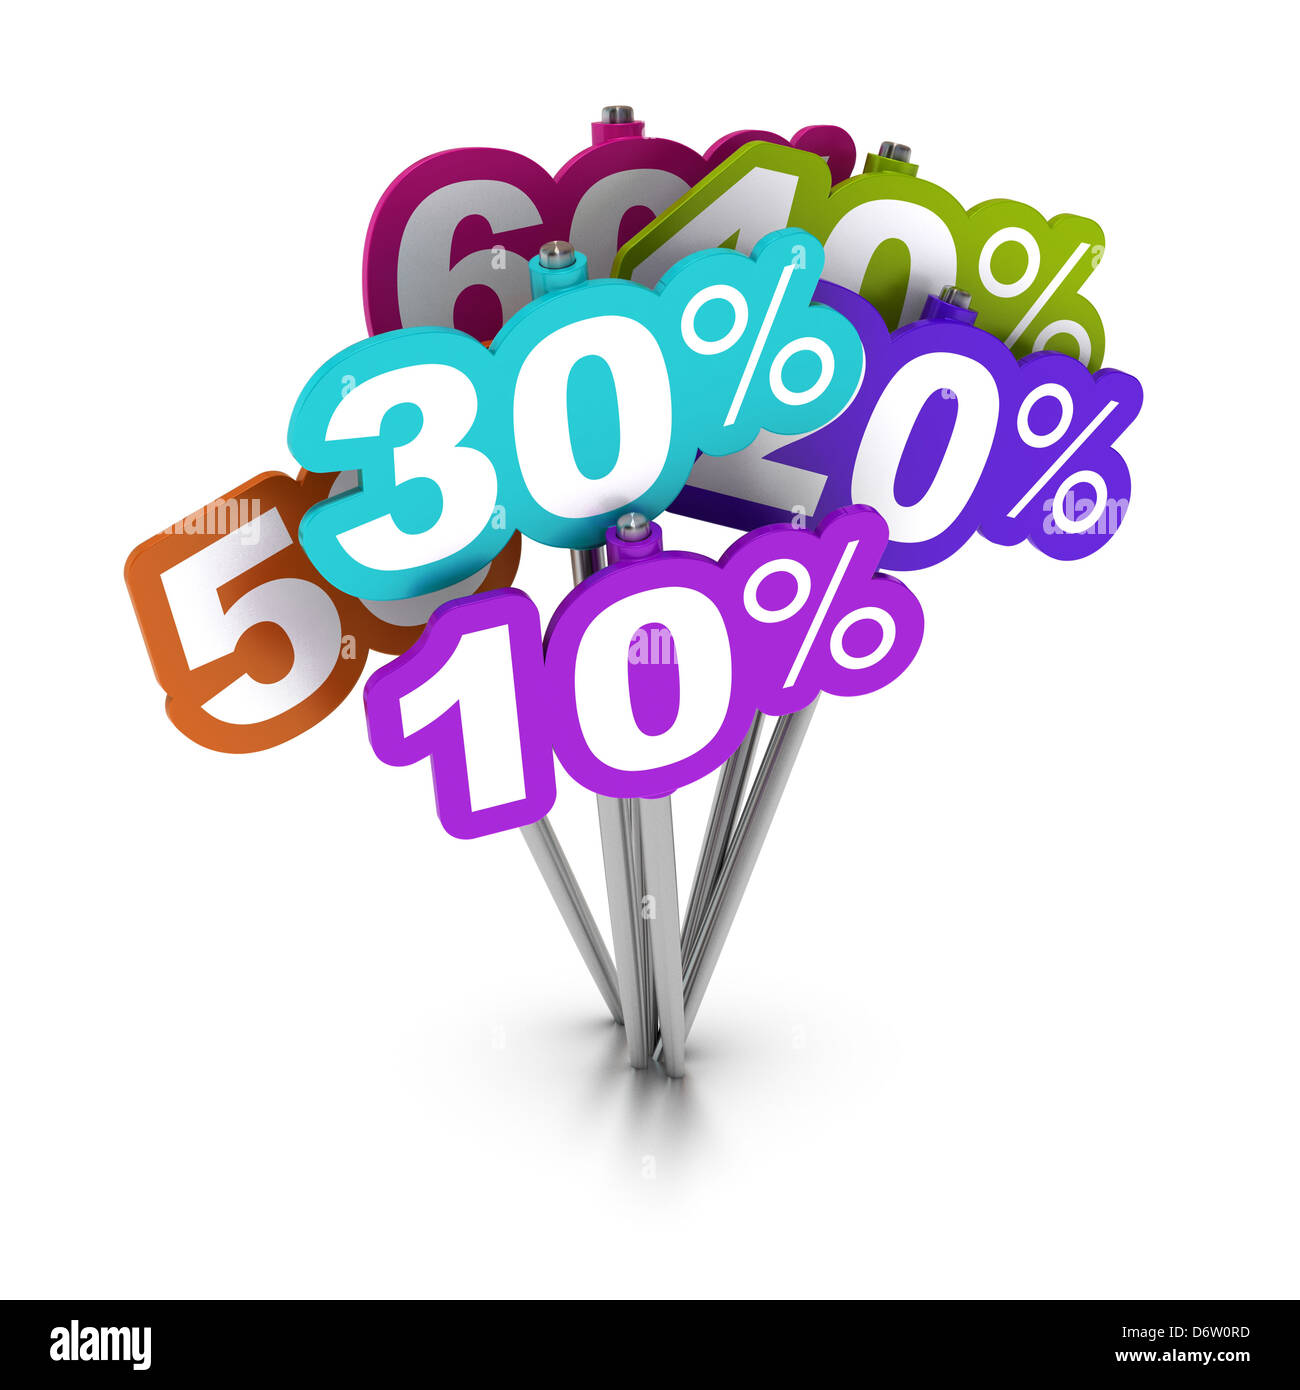 Many multicolored percent signs forming a bunch over white background Stock Photo